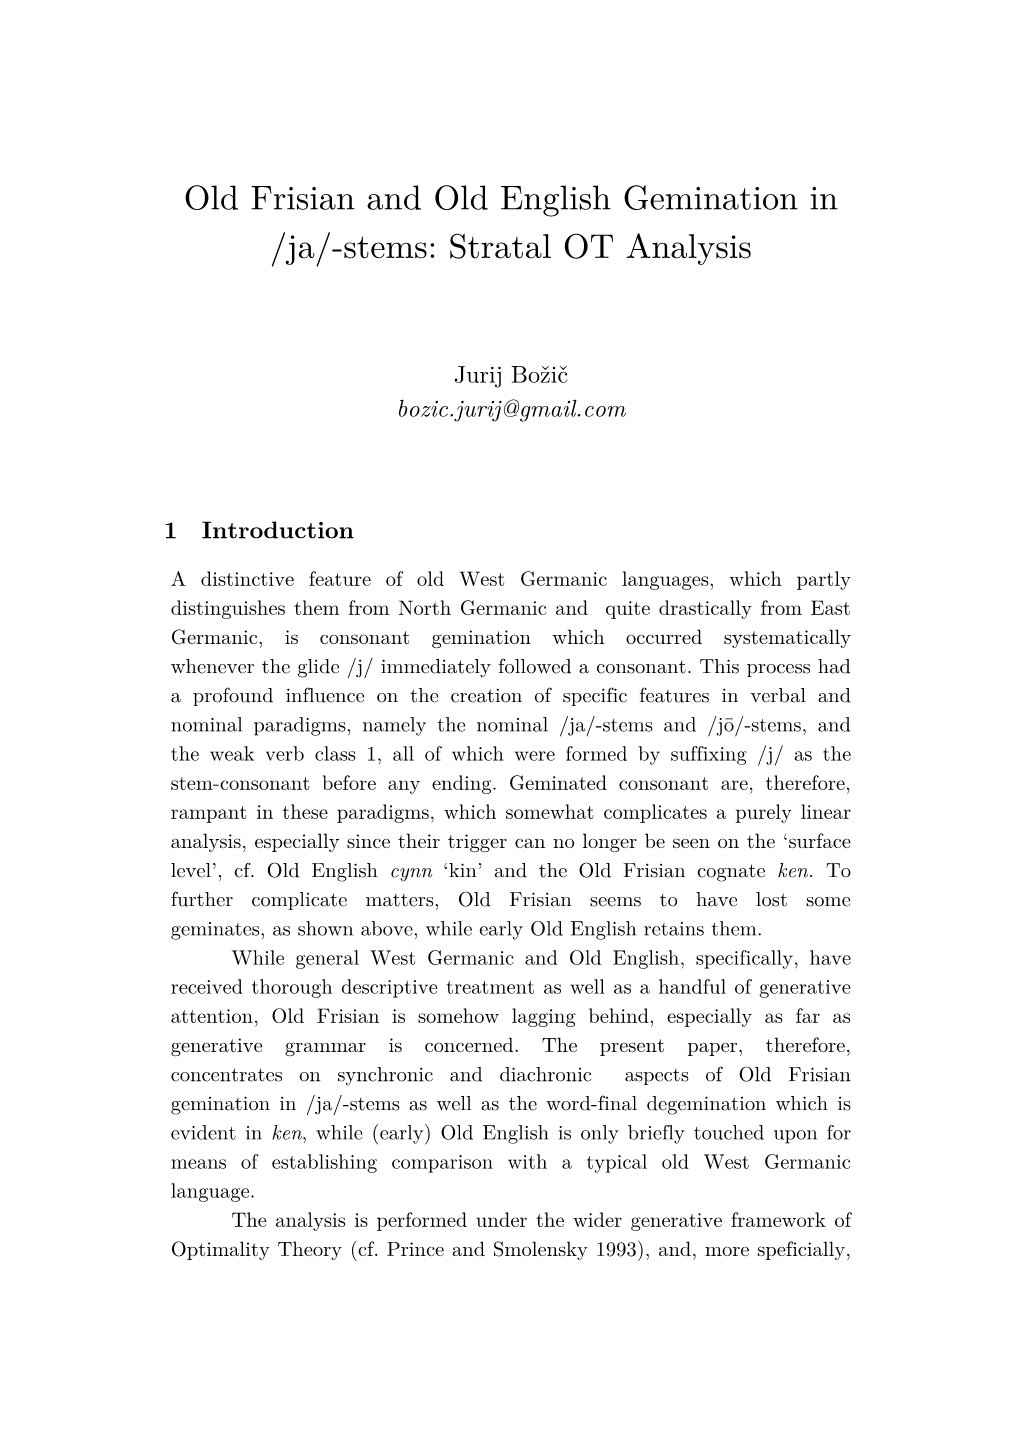 Old Frisian and Old English Gemination in /Ja/-Stems: Stratal OT Analysis